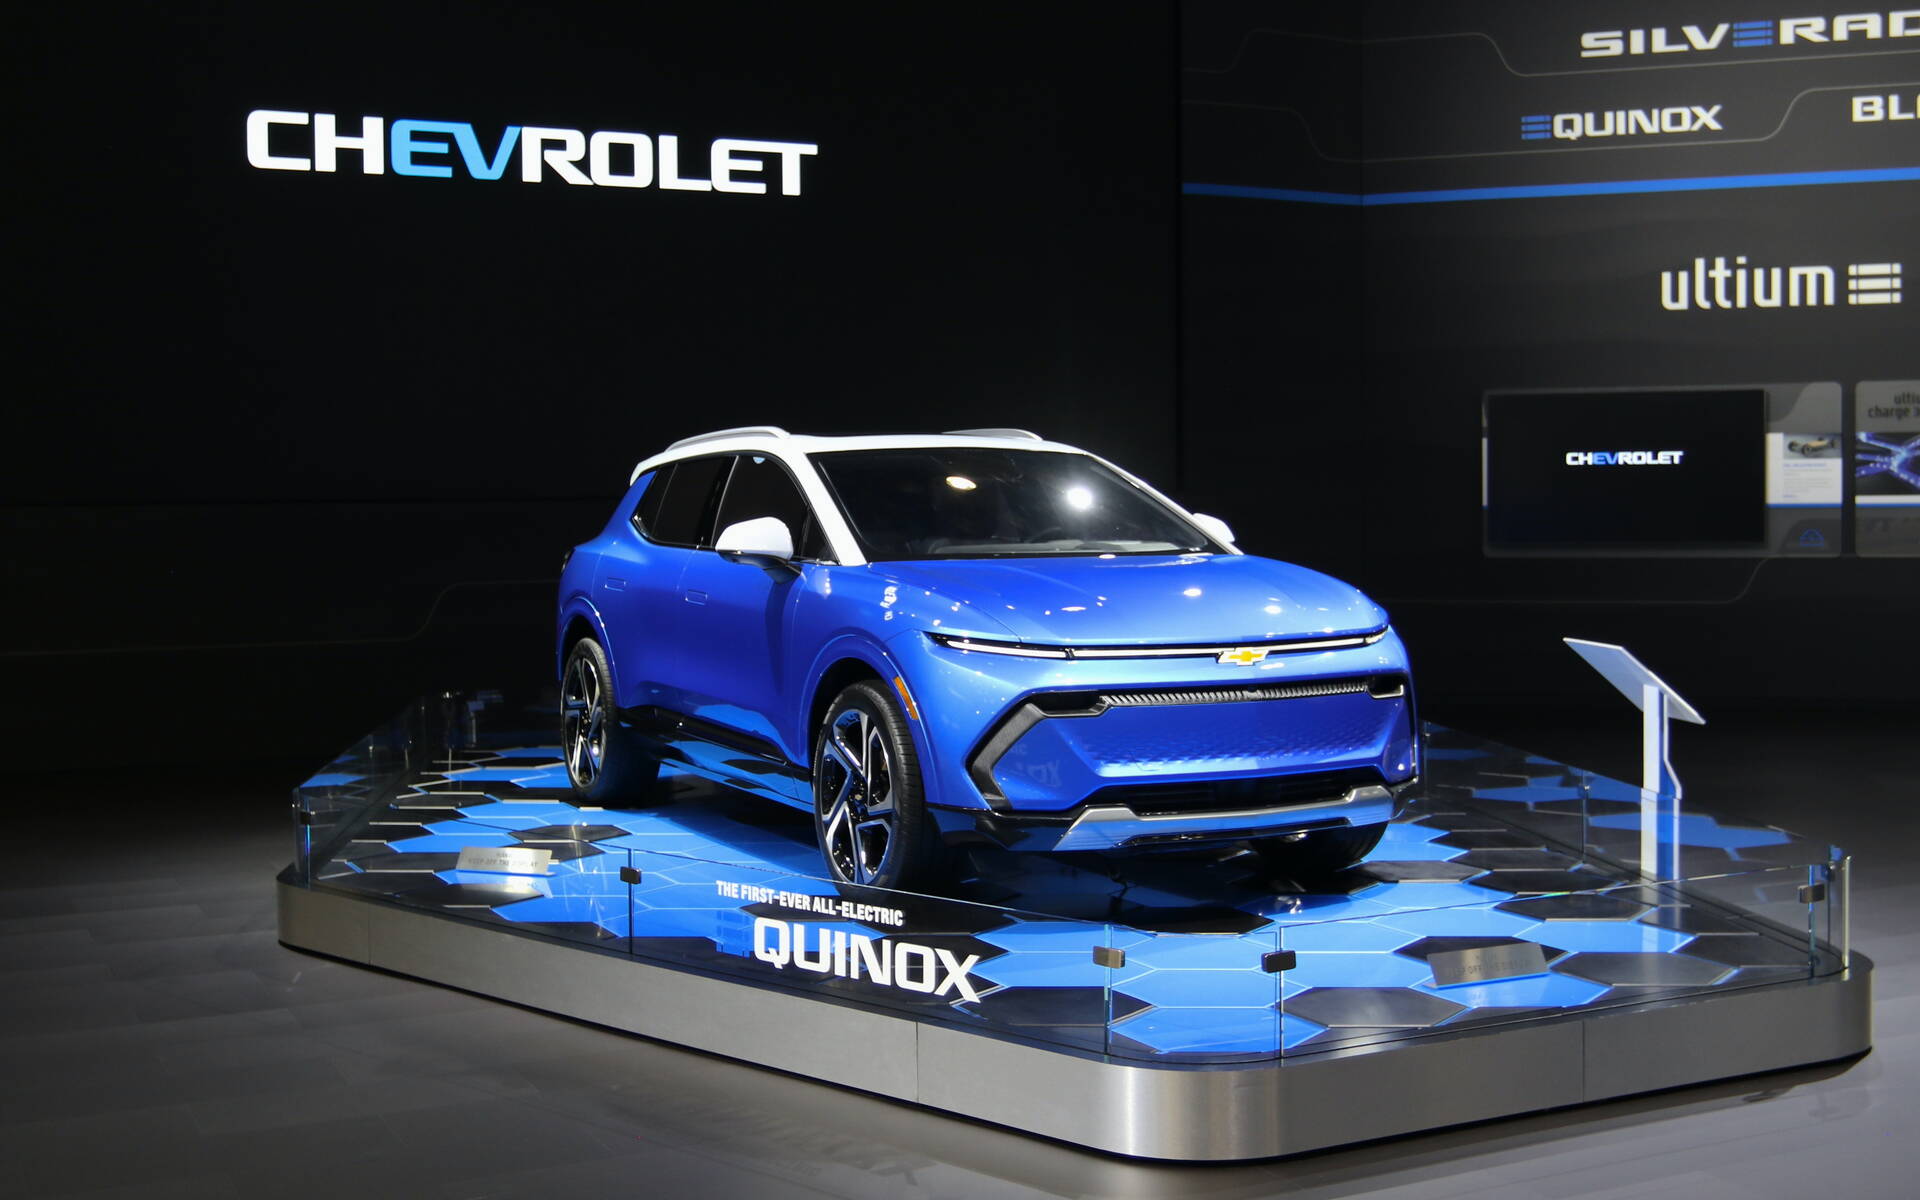 GM: Electric Equinox and Blazer SUVs are coming in 2023